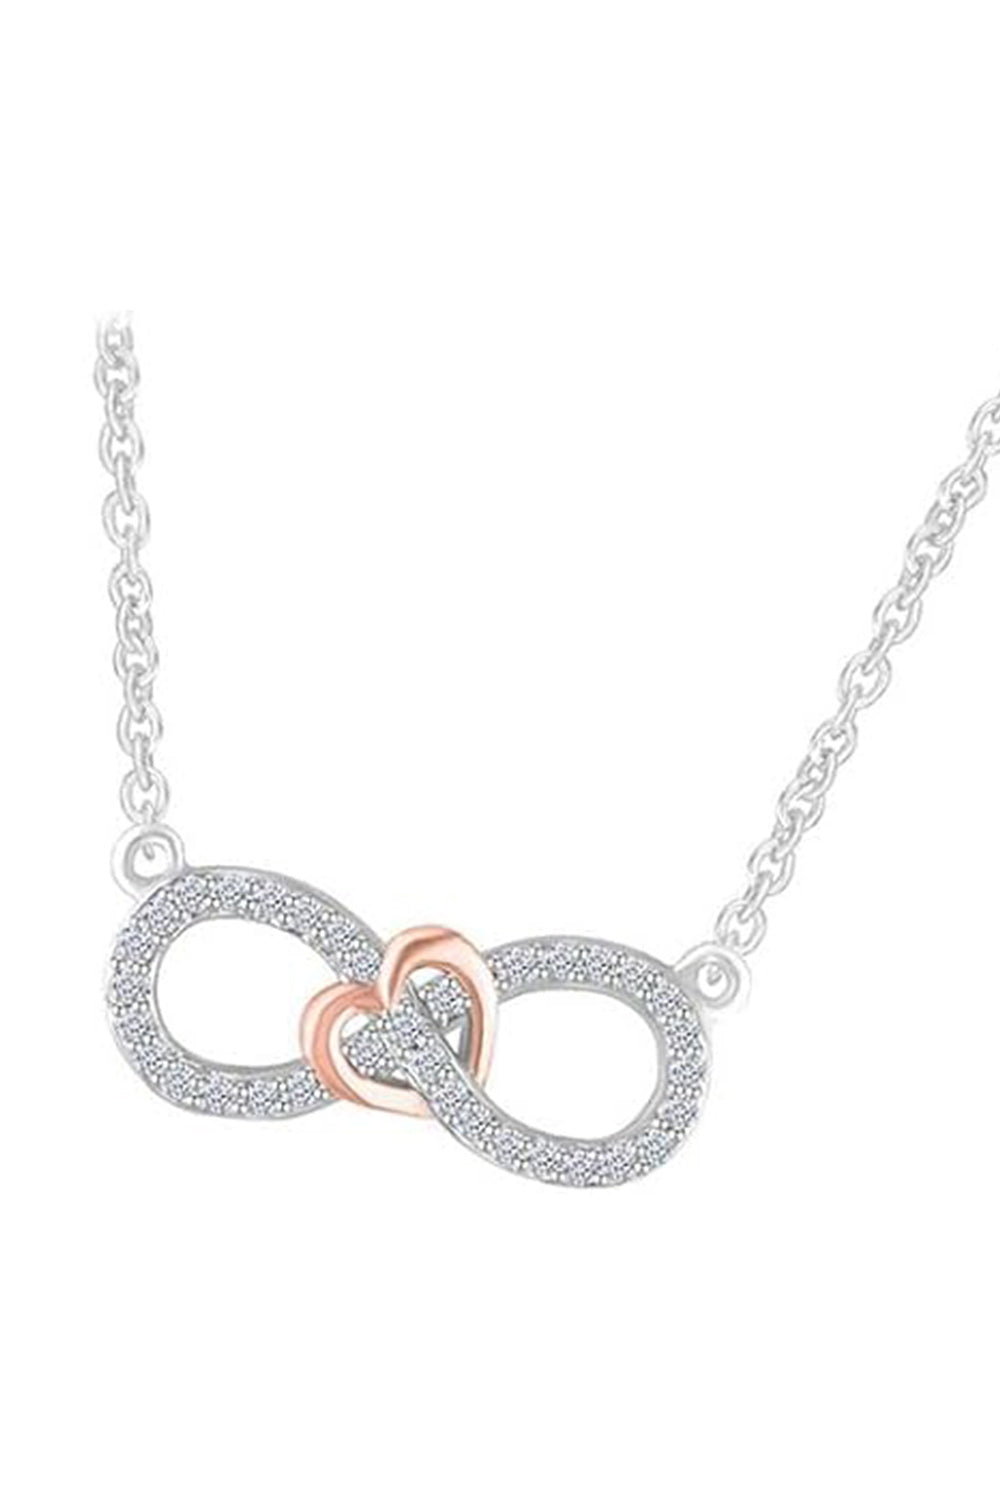 White Gold Color Diamond Infinity Heart Pendant Necklace